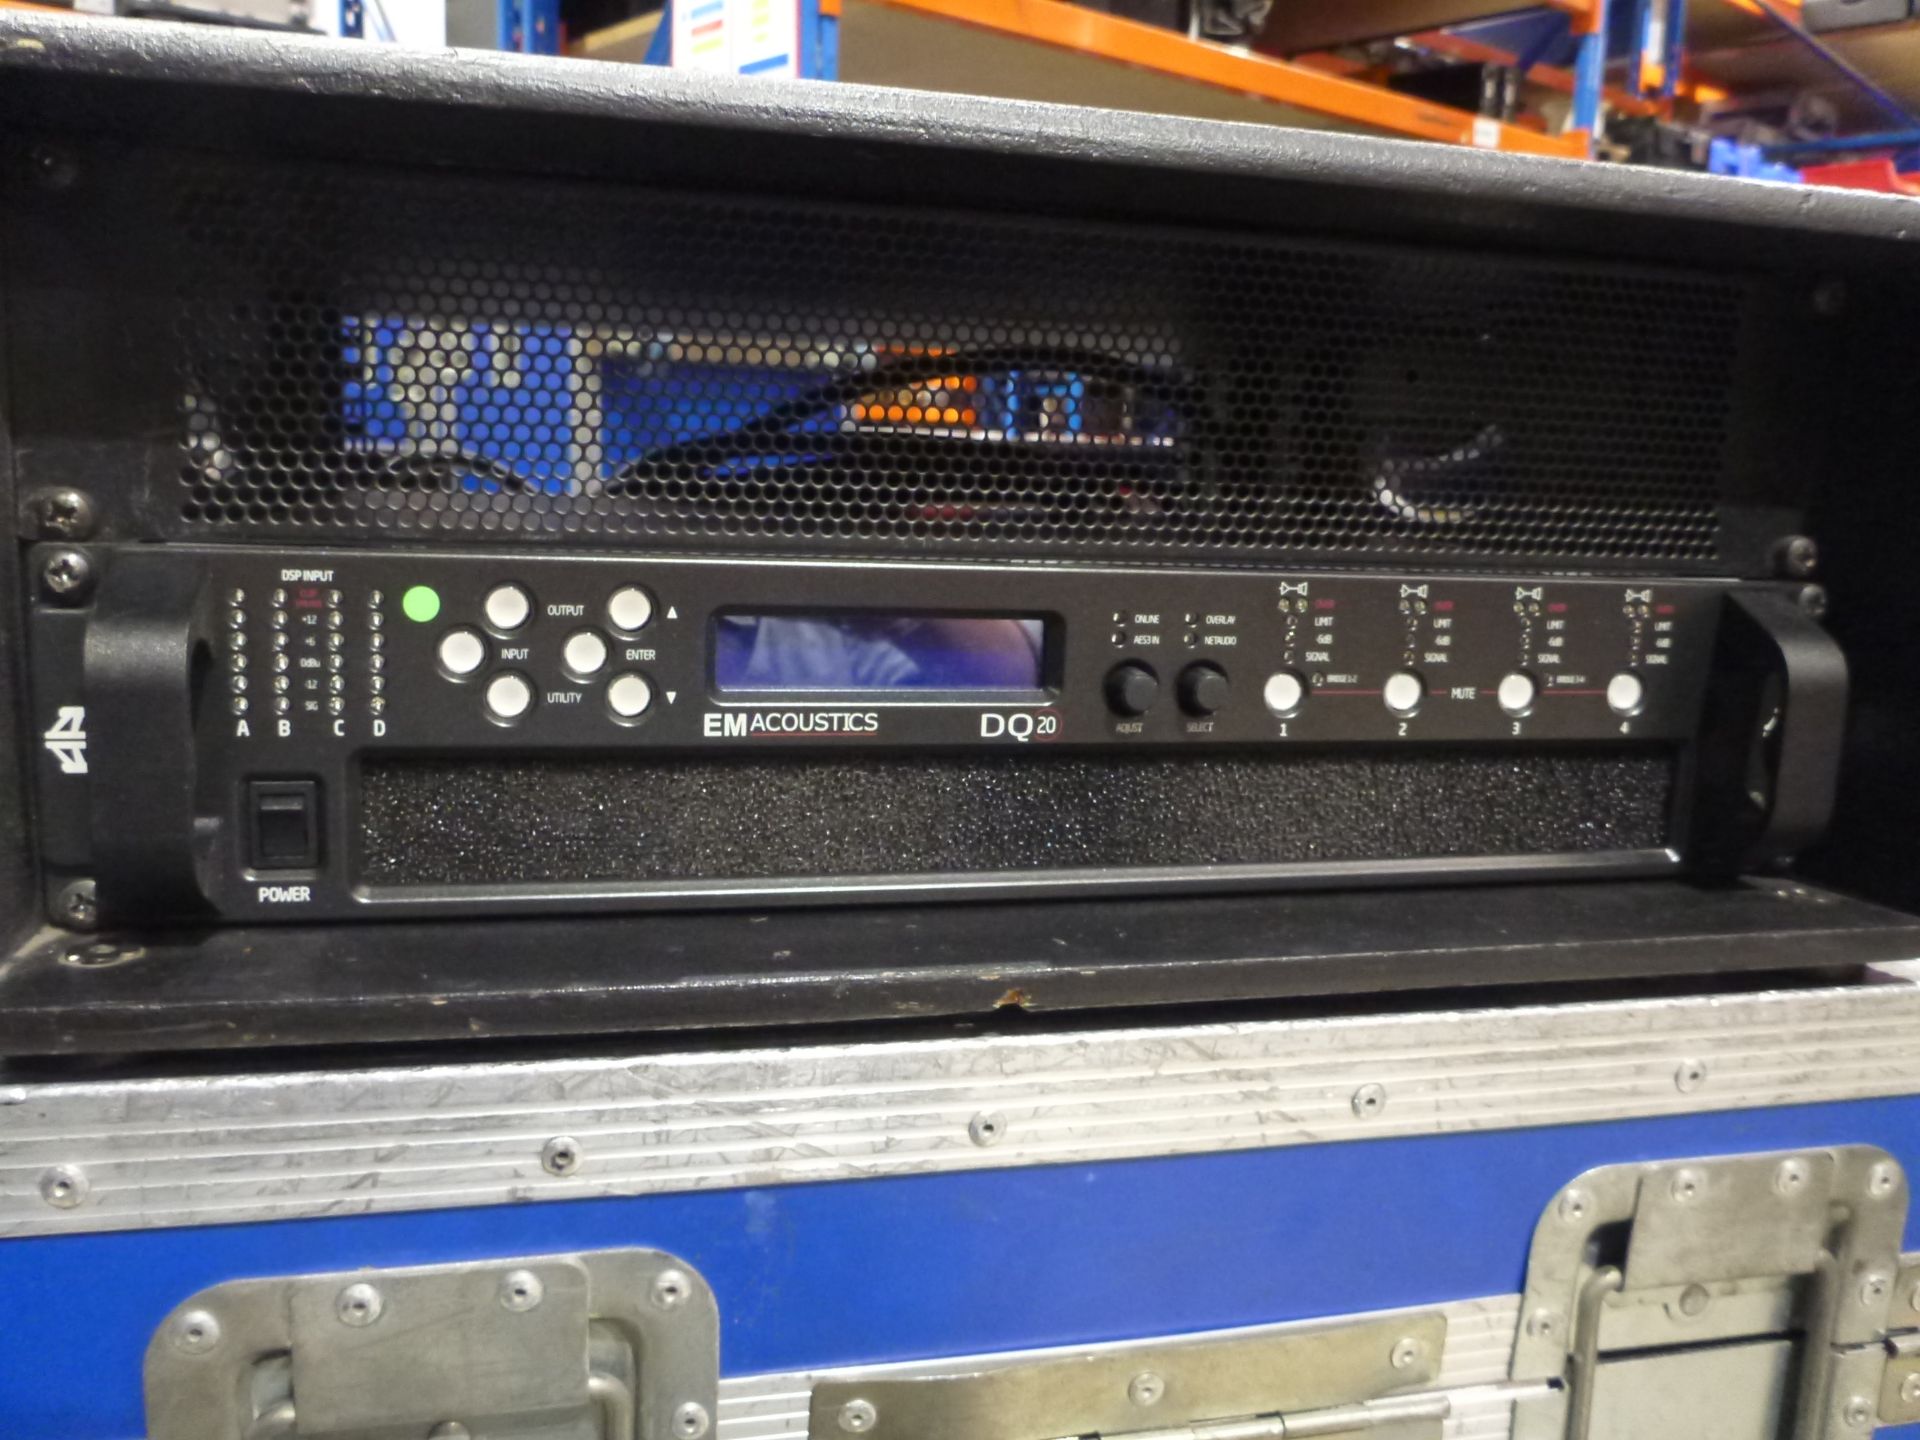 EM Acoustics DQ20 4 Chnl Power Amplifier, PowerCon to 16A, Mounted in rack mount box, Can be used